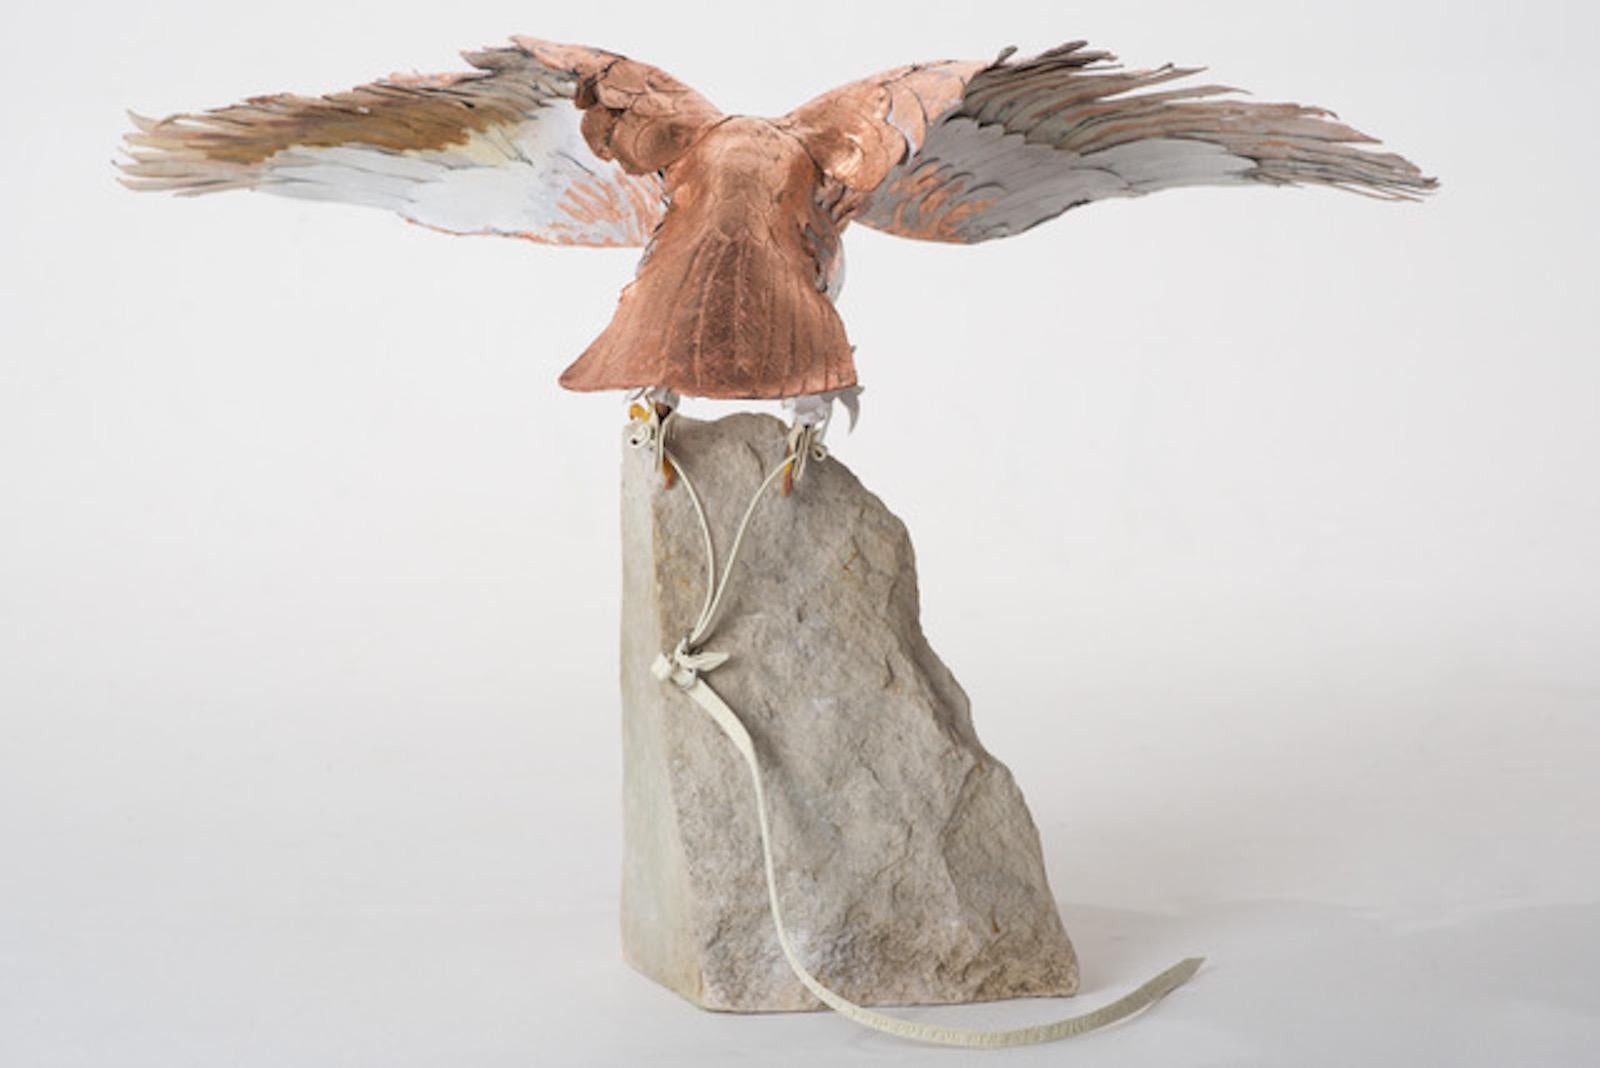 ‘Hawkules’ is the first piece in a new series entitled 'Lo Senti' (in progress) by award winning leather artist Georgina Brett Chinnery.

‘Lo Senti’ runs along the theme of freedom and restriction. ‘Hawkules’ depicts a lifesize hawk as a captured